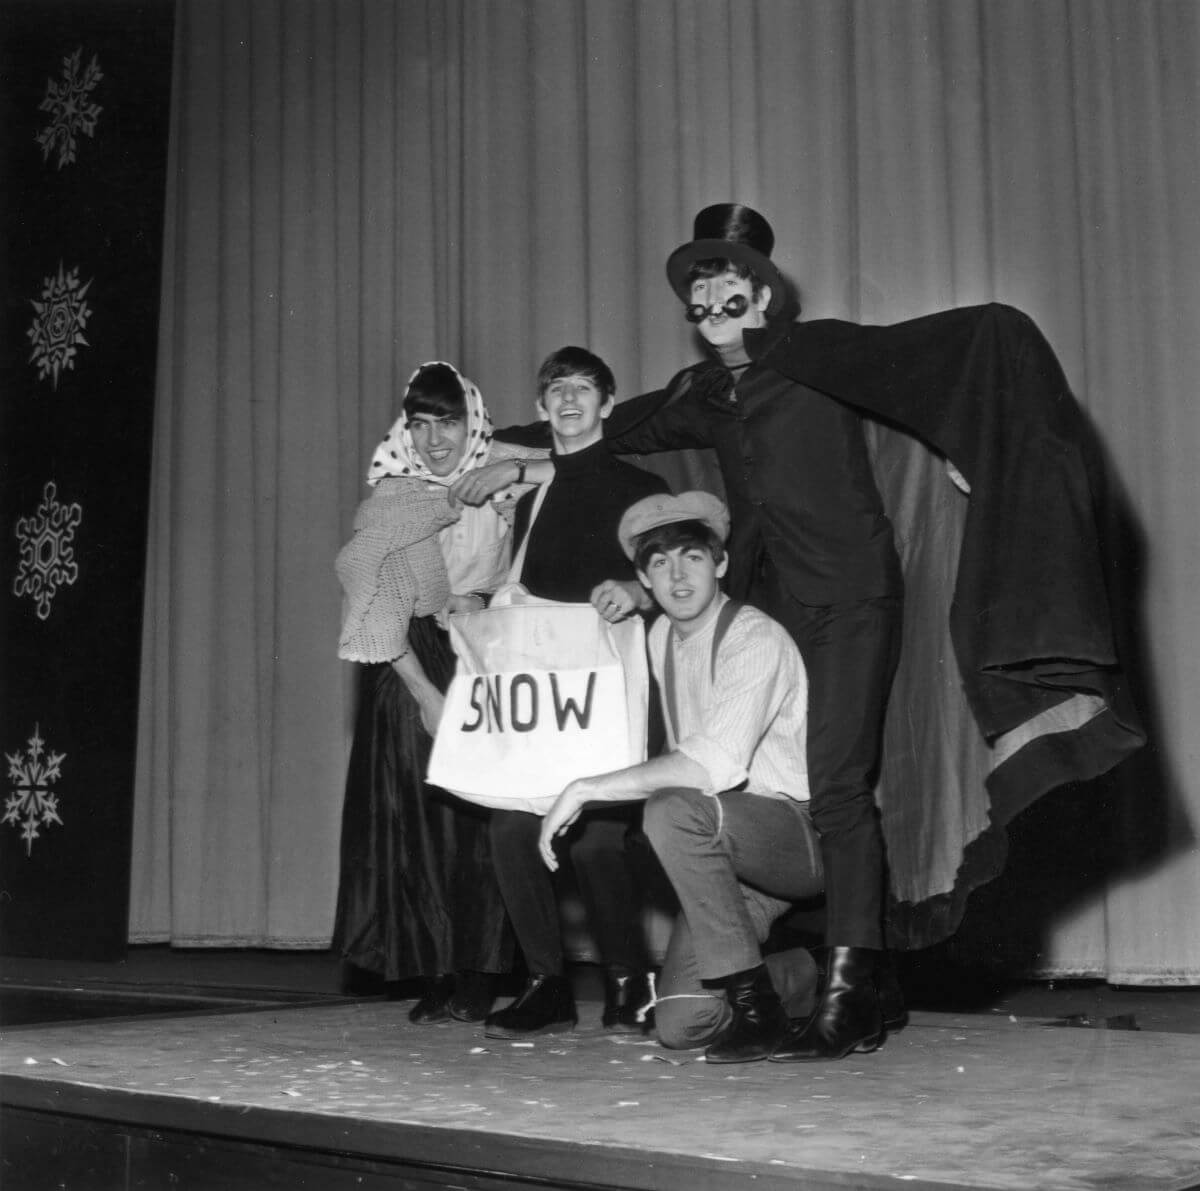 A black and white picture of The Beatles standing on a stage in costumes holding a sign that says "SNOW."